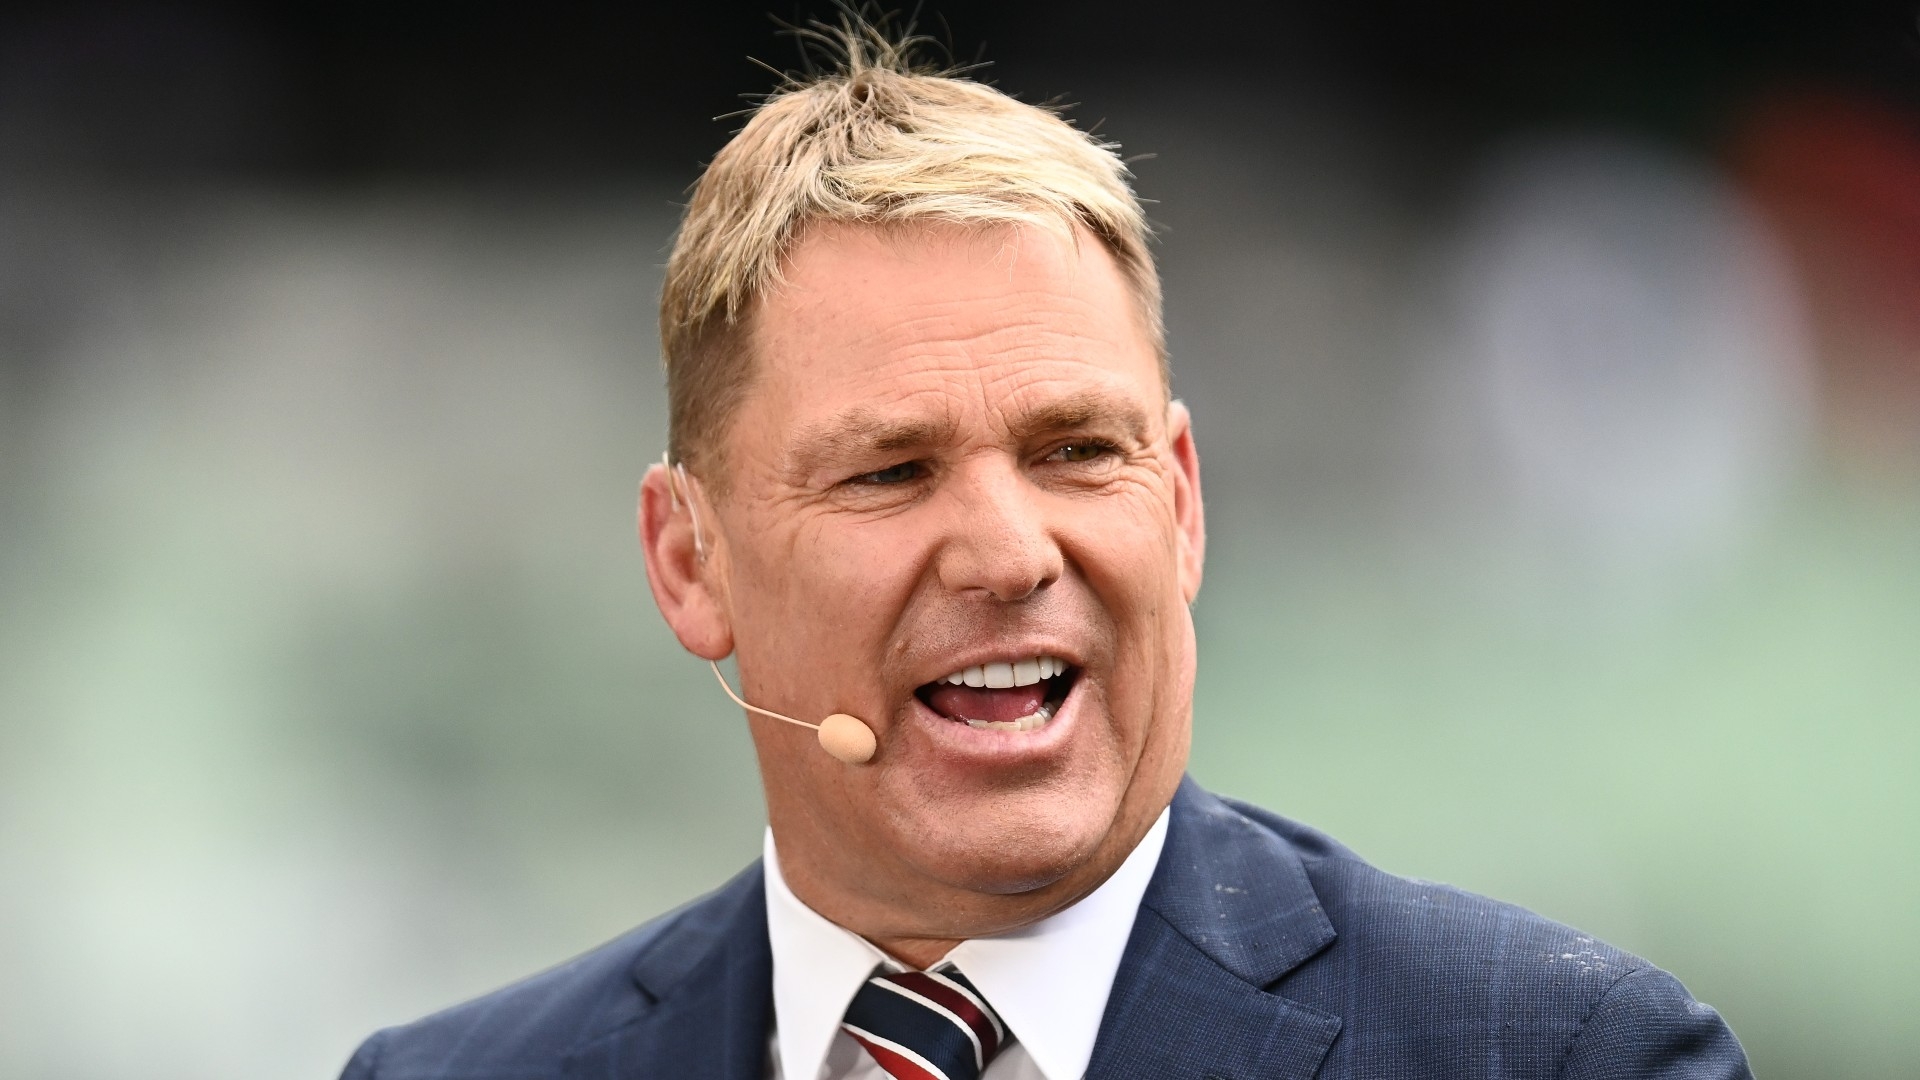 Shane Warne dies aged 52: World of football mourns 'greatest of all time'  after cricket icon's death from suspected heart attack  Singapore